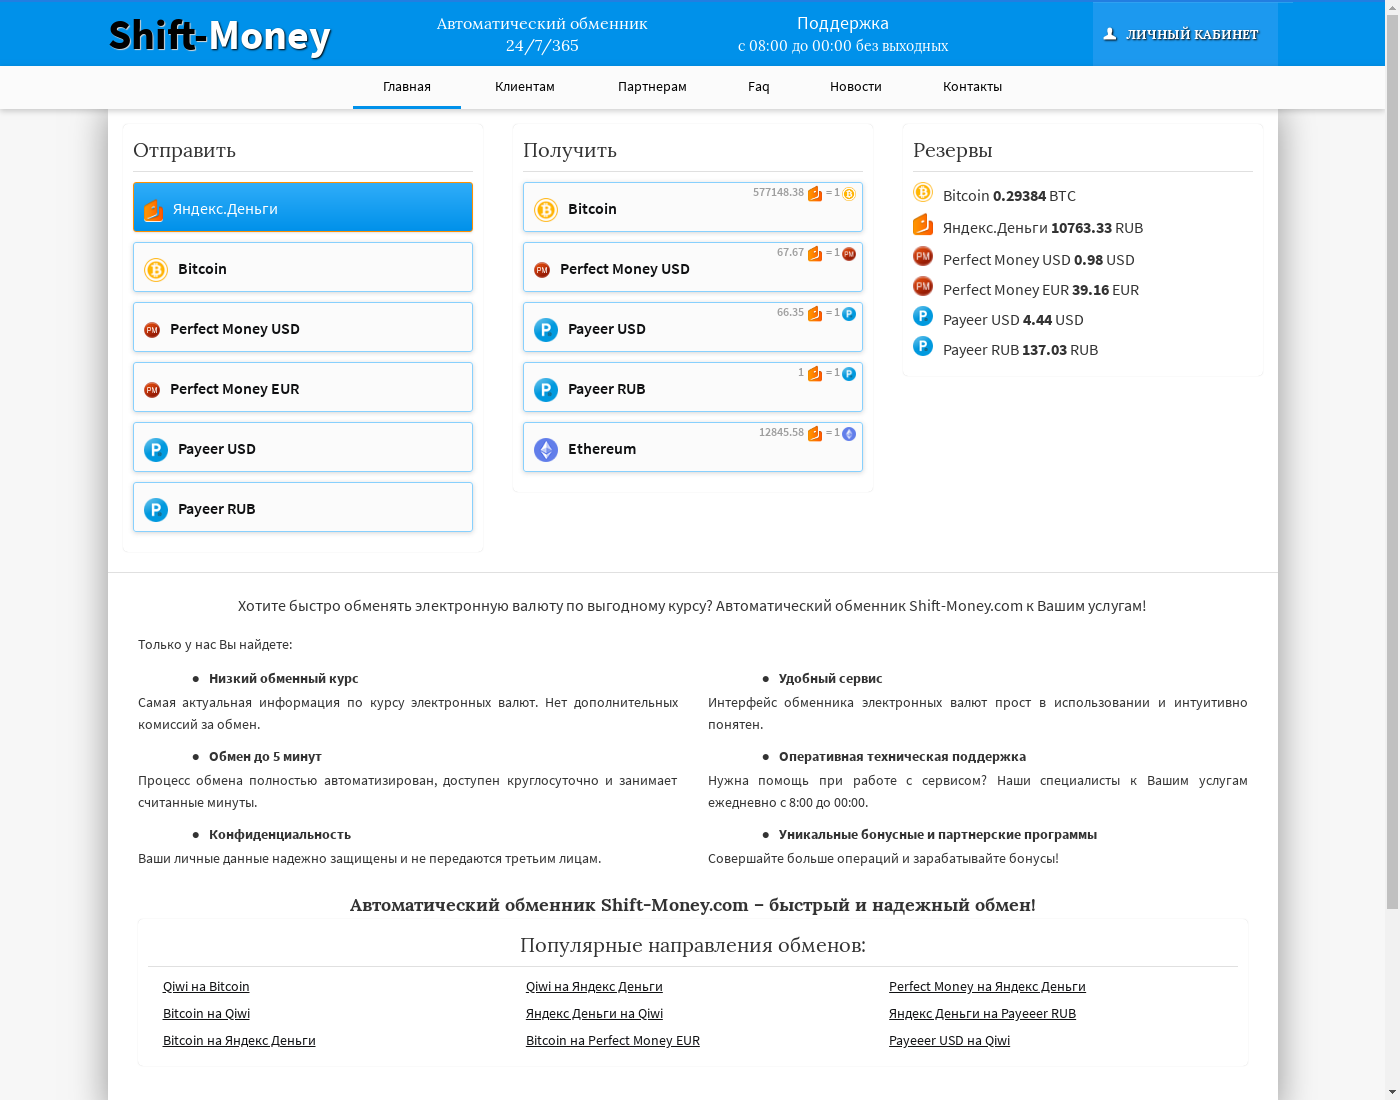 ShiftMoney user interface: the home page in English